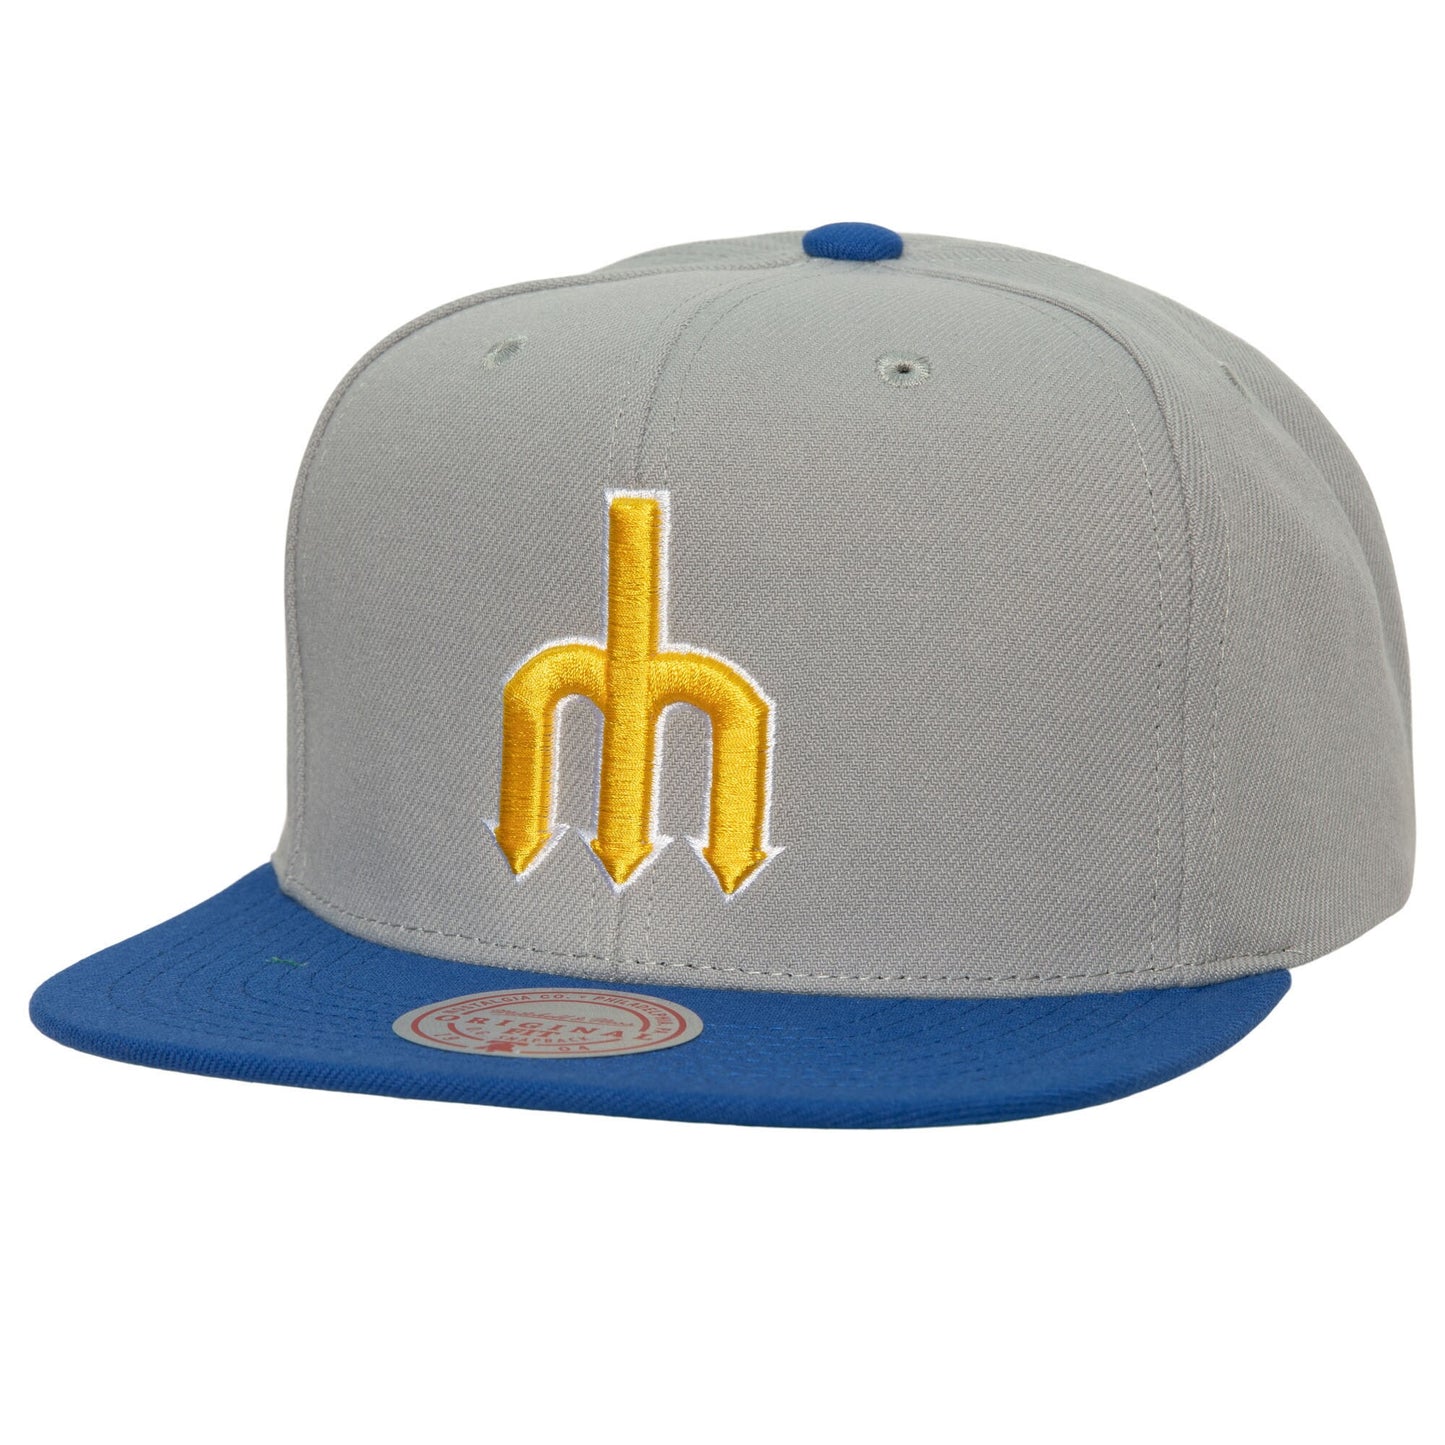 Seattle Mariners Mitchell & Ness Cooperstown Collection Away Snapback Hat - Gray